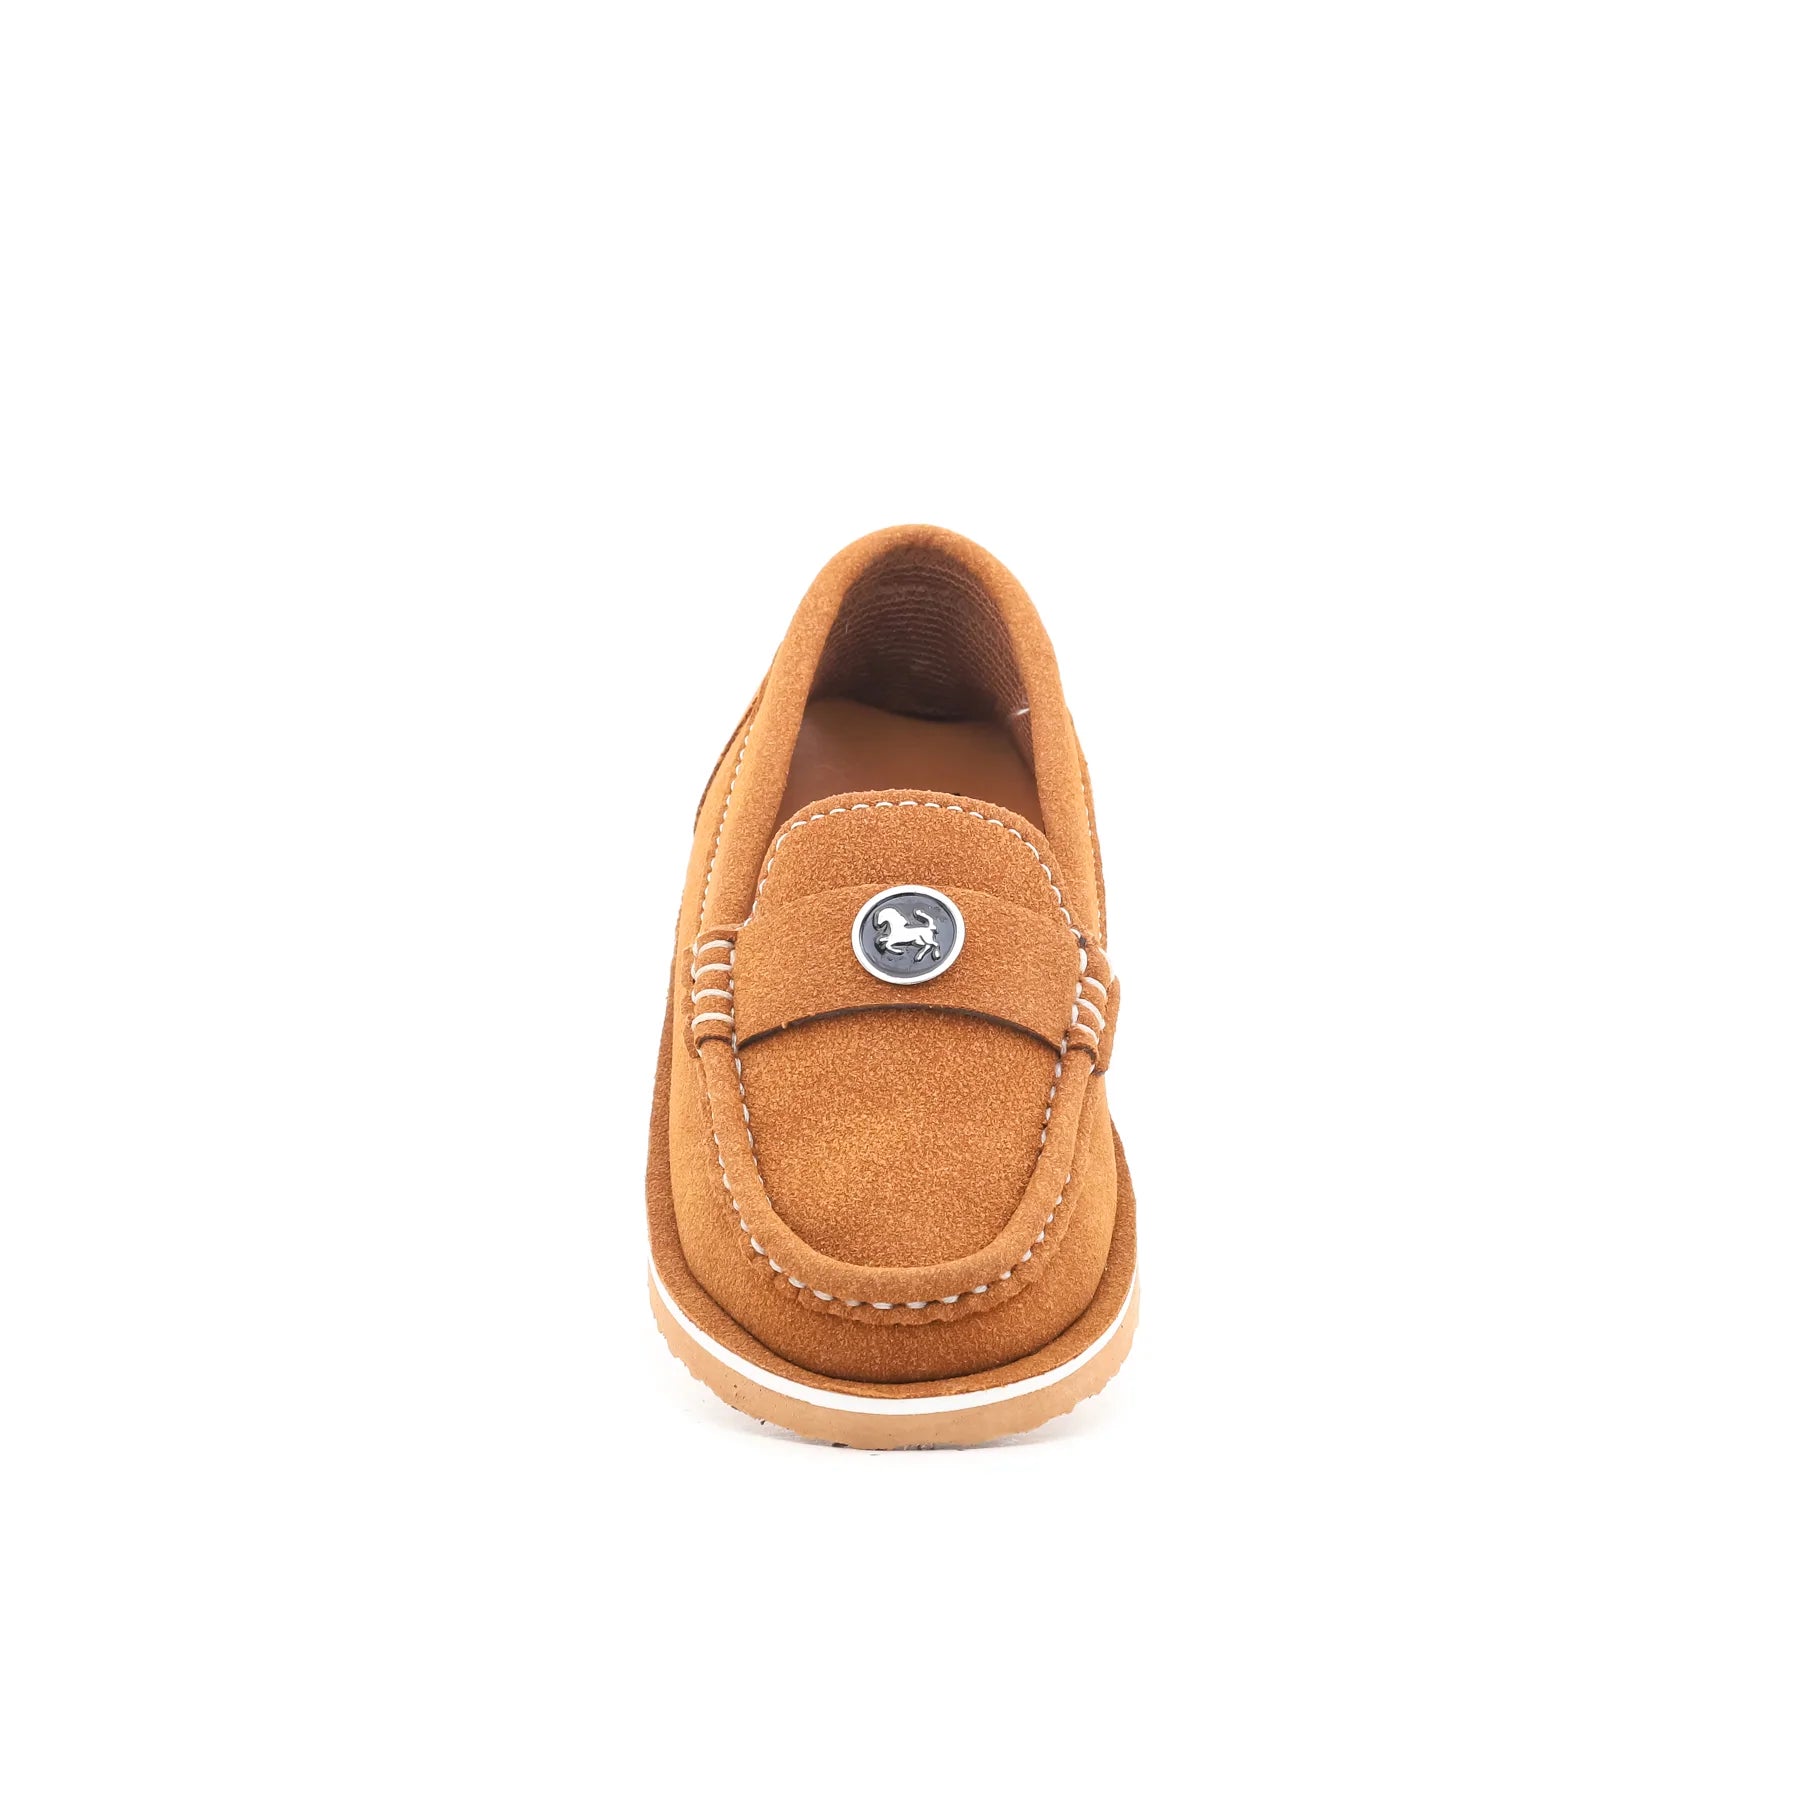 Boys Brown Casual Moccasin KD0315